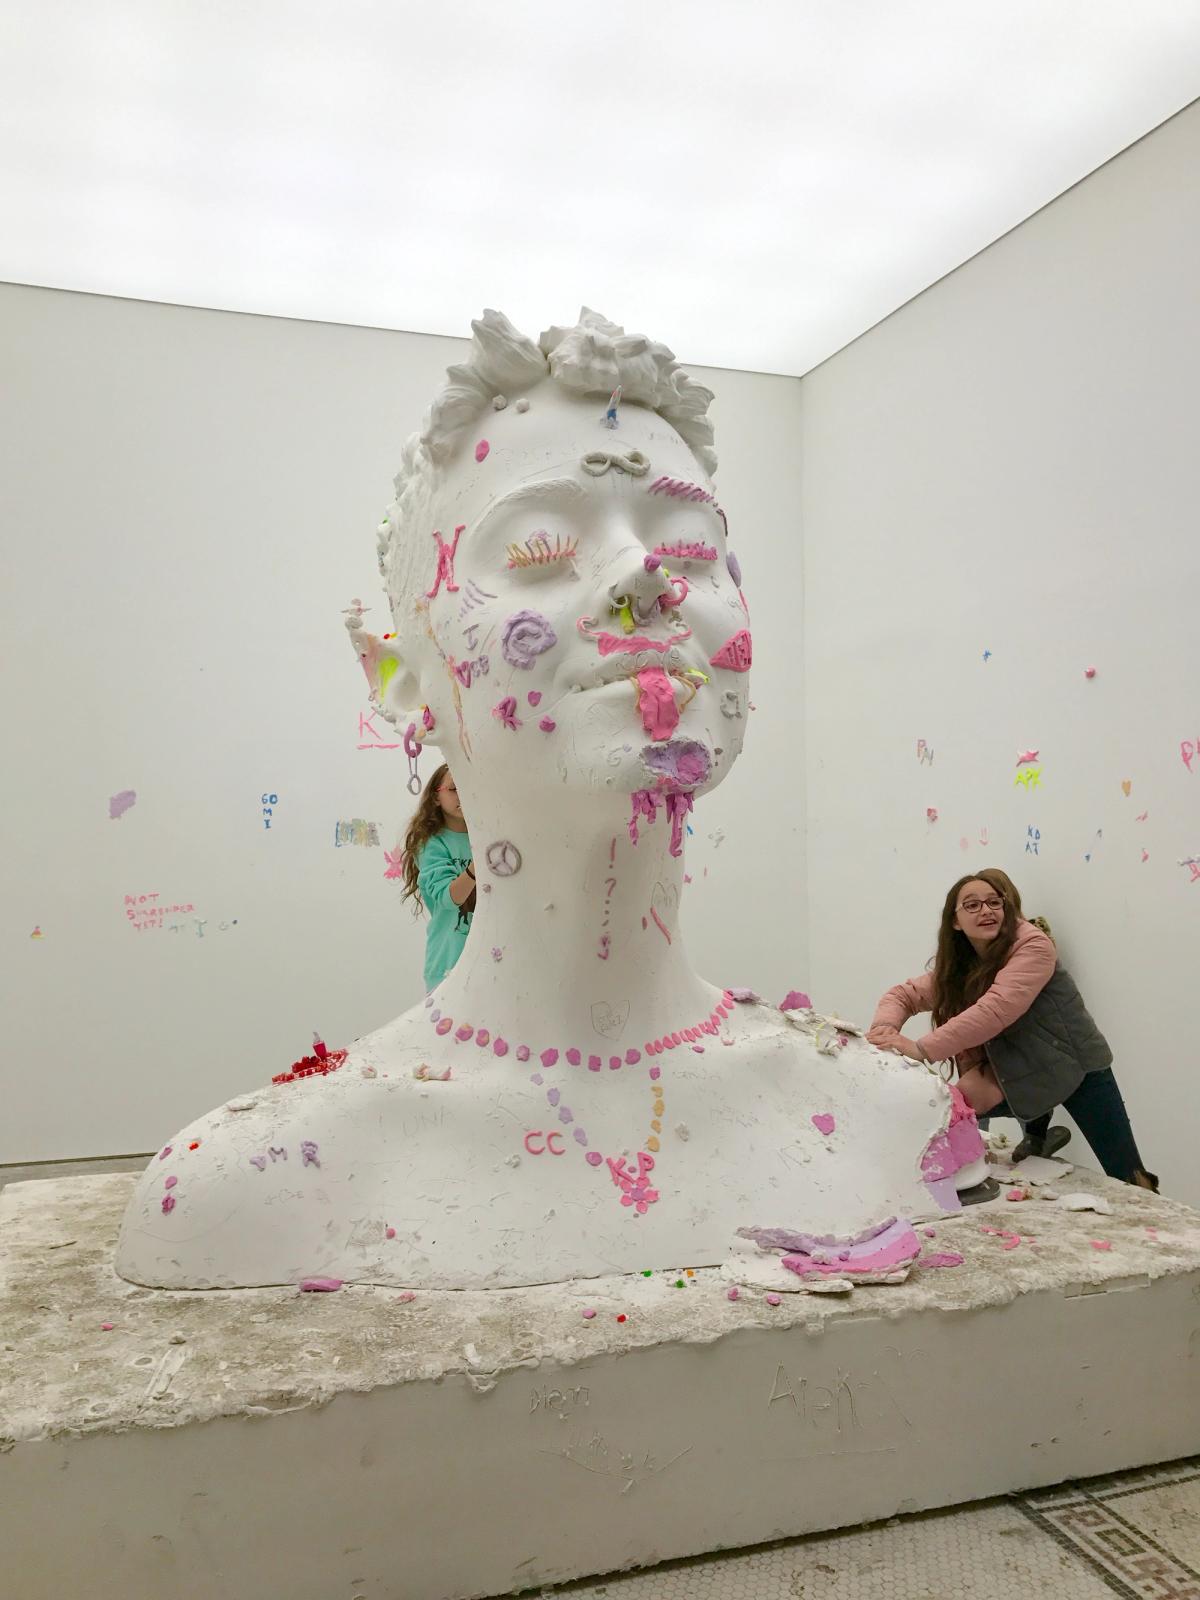 Katy Perry and Urs Fischer Made a Sculpture Together—and It Was 'Bliss